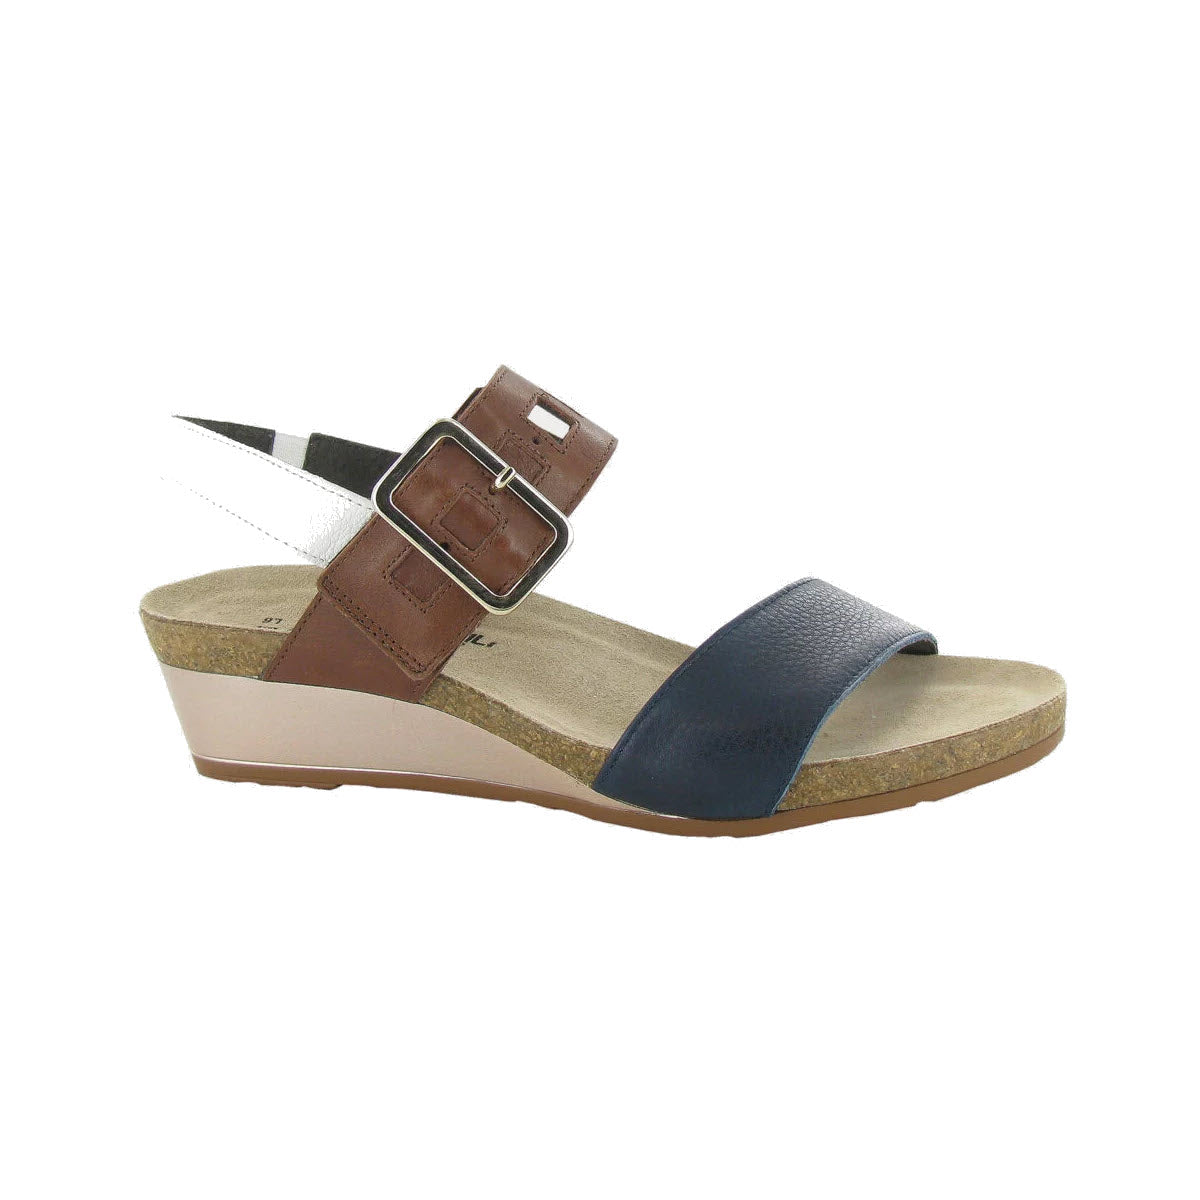 A women's Naot Dynasty wedge sandal with multi-colored straps and a cork heel on a white background.